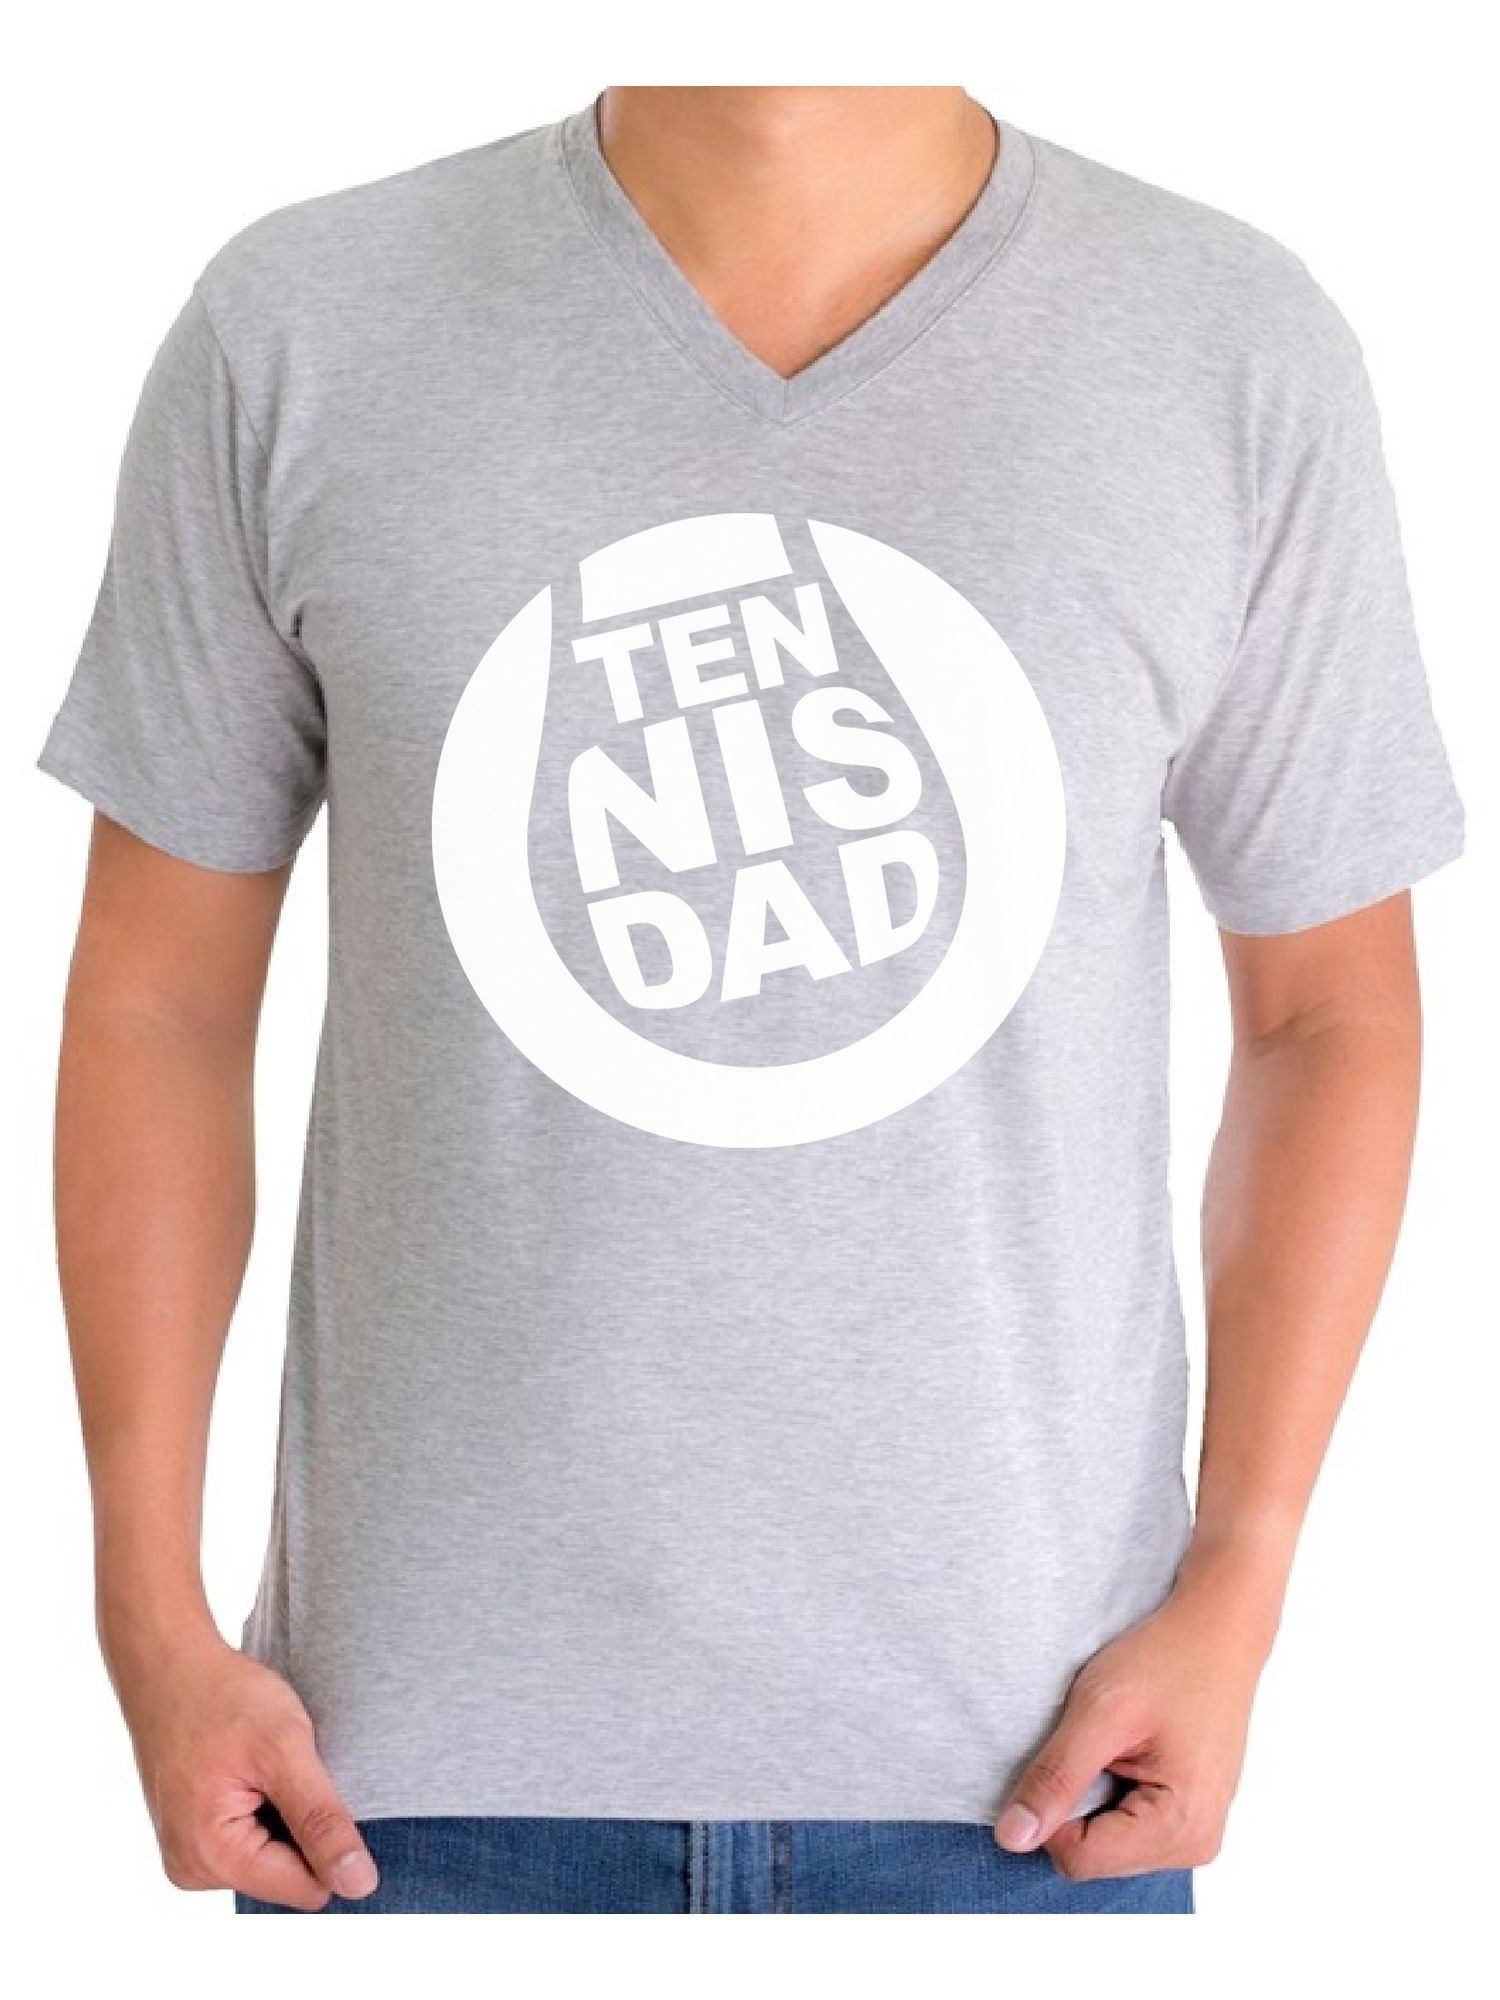 Awkward Styles Men's Tennis Dad Graphic V-neck T-shirt Tops Father`s Day Gift Daddy Tennis Player Gift - image 1 of 4